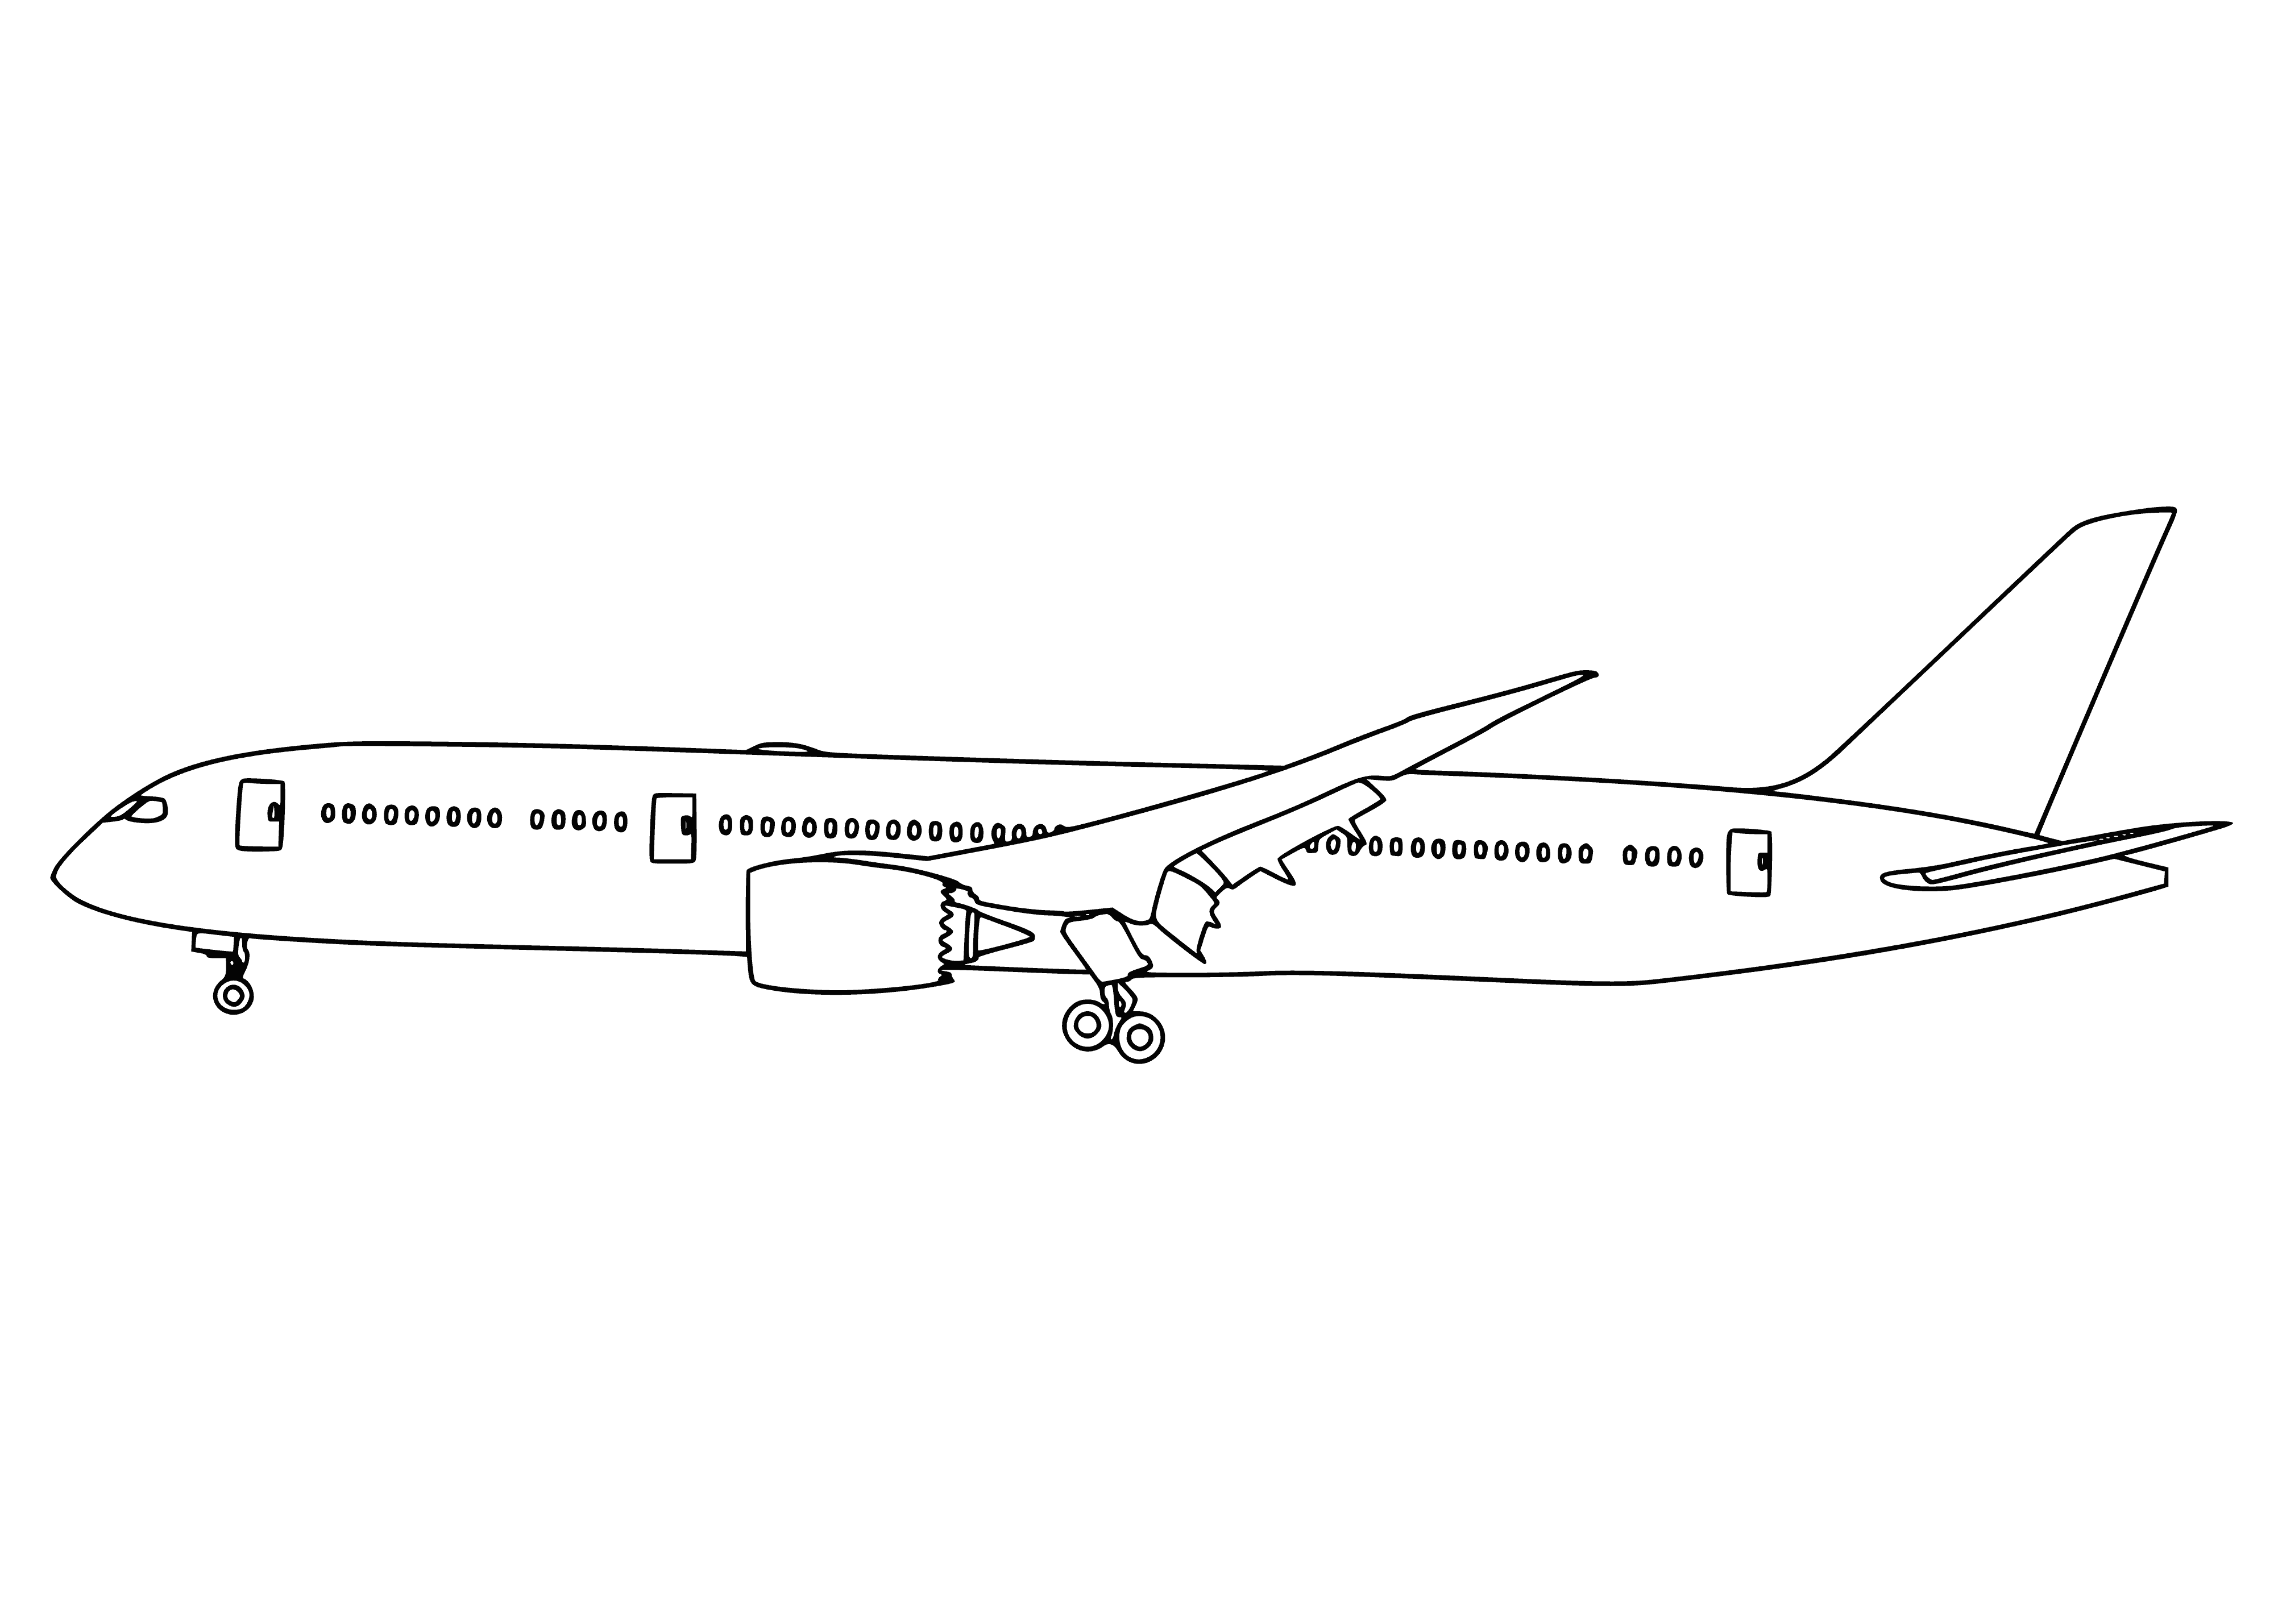 coloring page: 787 is a twin-engine, wide-body airplane; the first to use composite materials. It seats 210-290 and has a range of 8,500-9,400 nmi and two Rolls-Royce/GE engines.